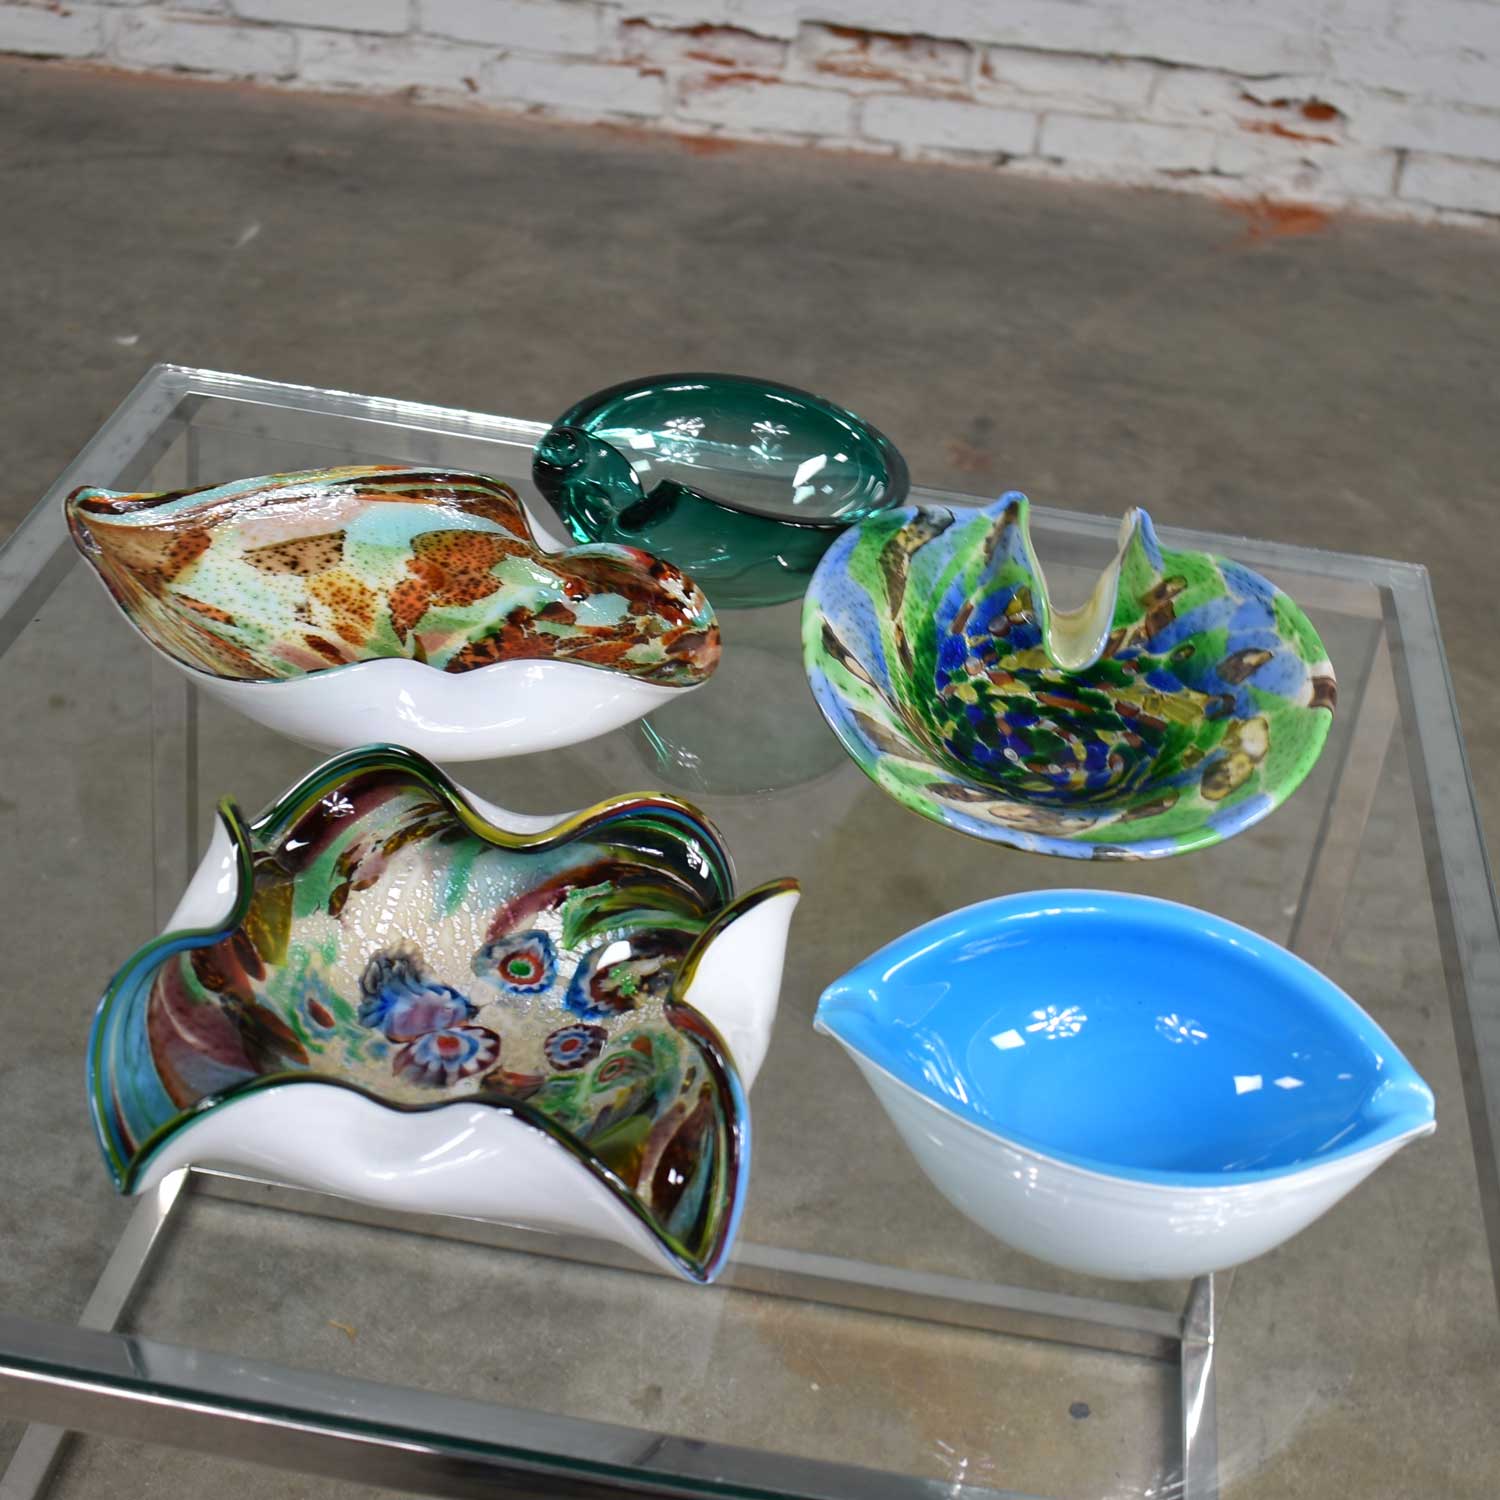 Set 5 Pieces Italian Murano Glass Dishes AVeM Tutti Frutti & Others Turquoise Blue Green